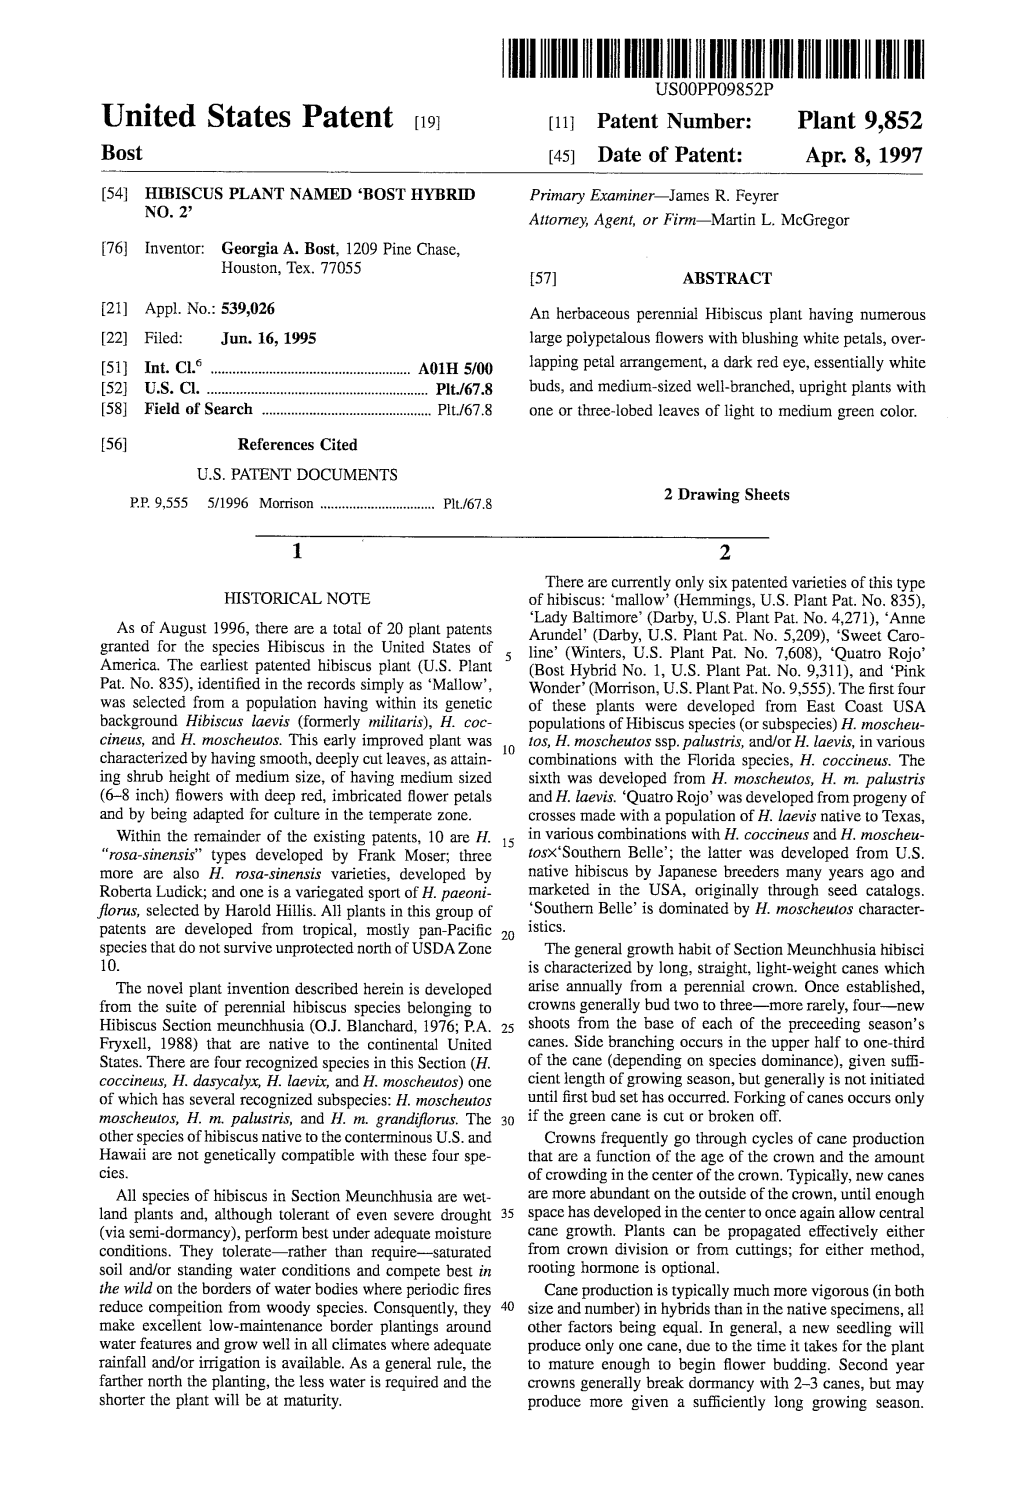 Illlllllllllllillllllllllllwlllj?Llljlllllllllllllllllllllllillllllll United States Patent [19] [11] Patent Number: Plant 9,852 Bost [45] Date of Patent: Apr